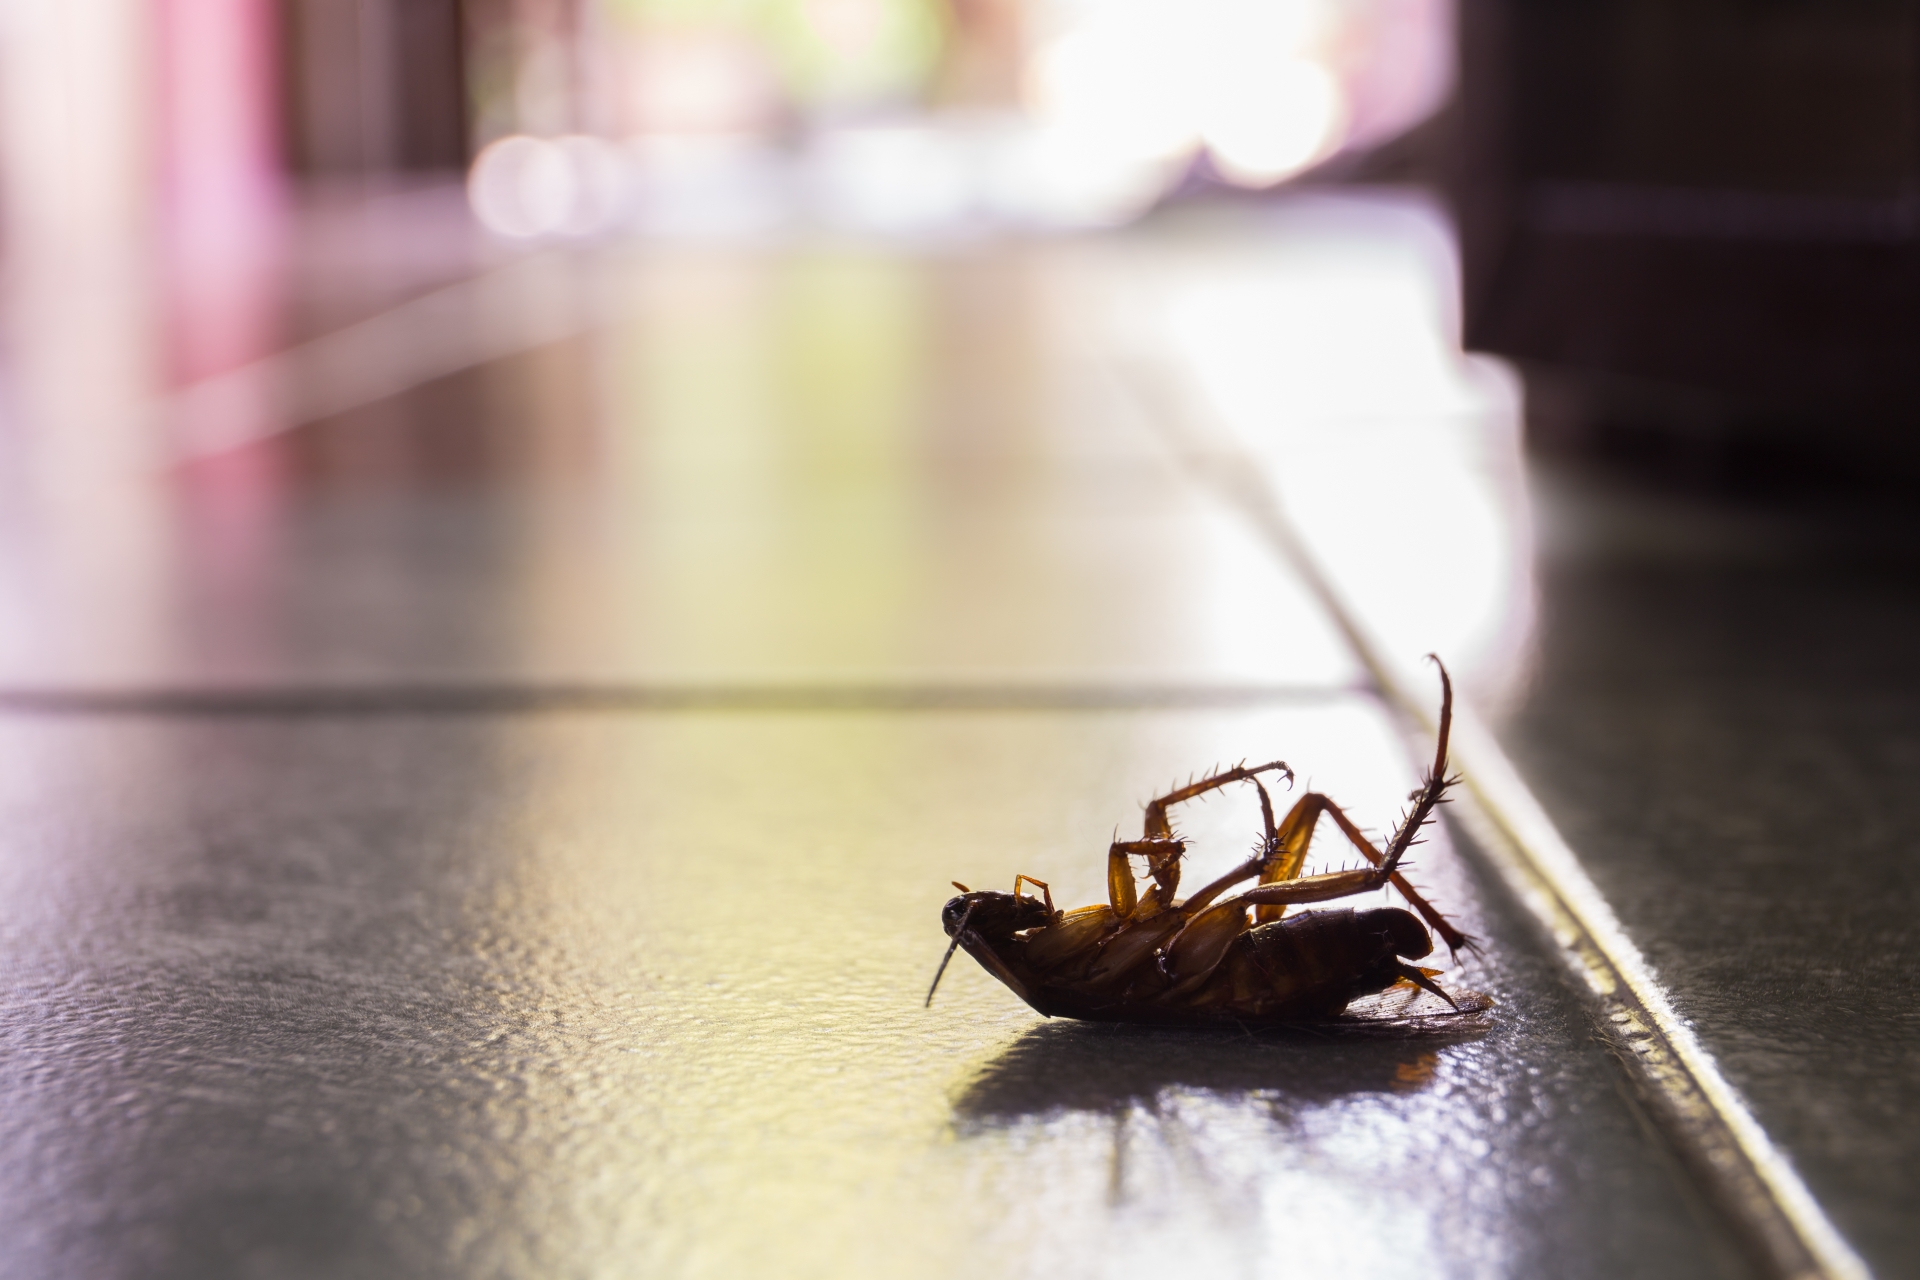 Cockroach Control, Pest Control in Chessington, Hook, KT9. Call Now 020 8166 9746